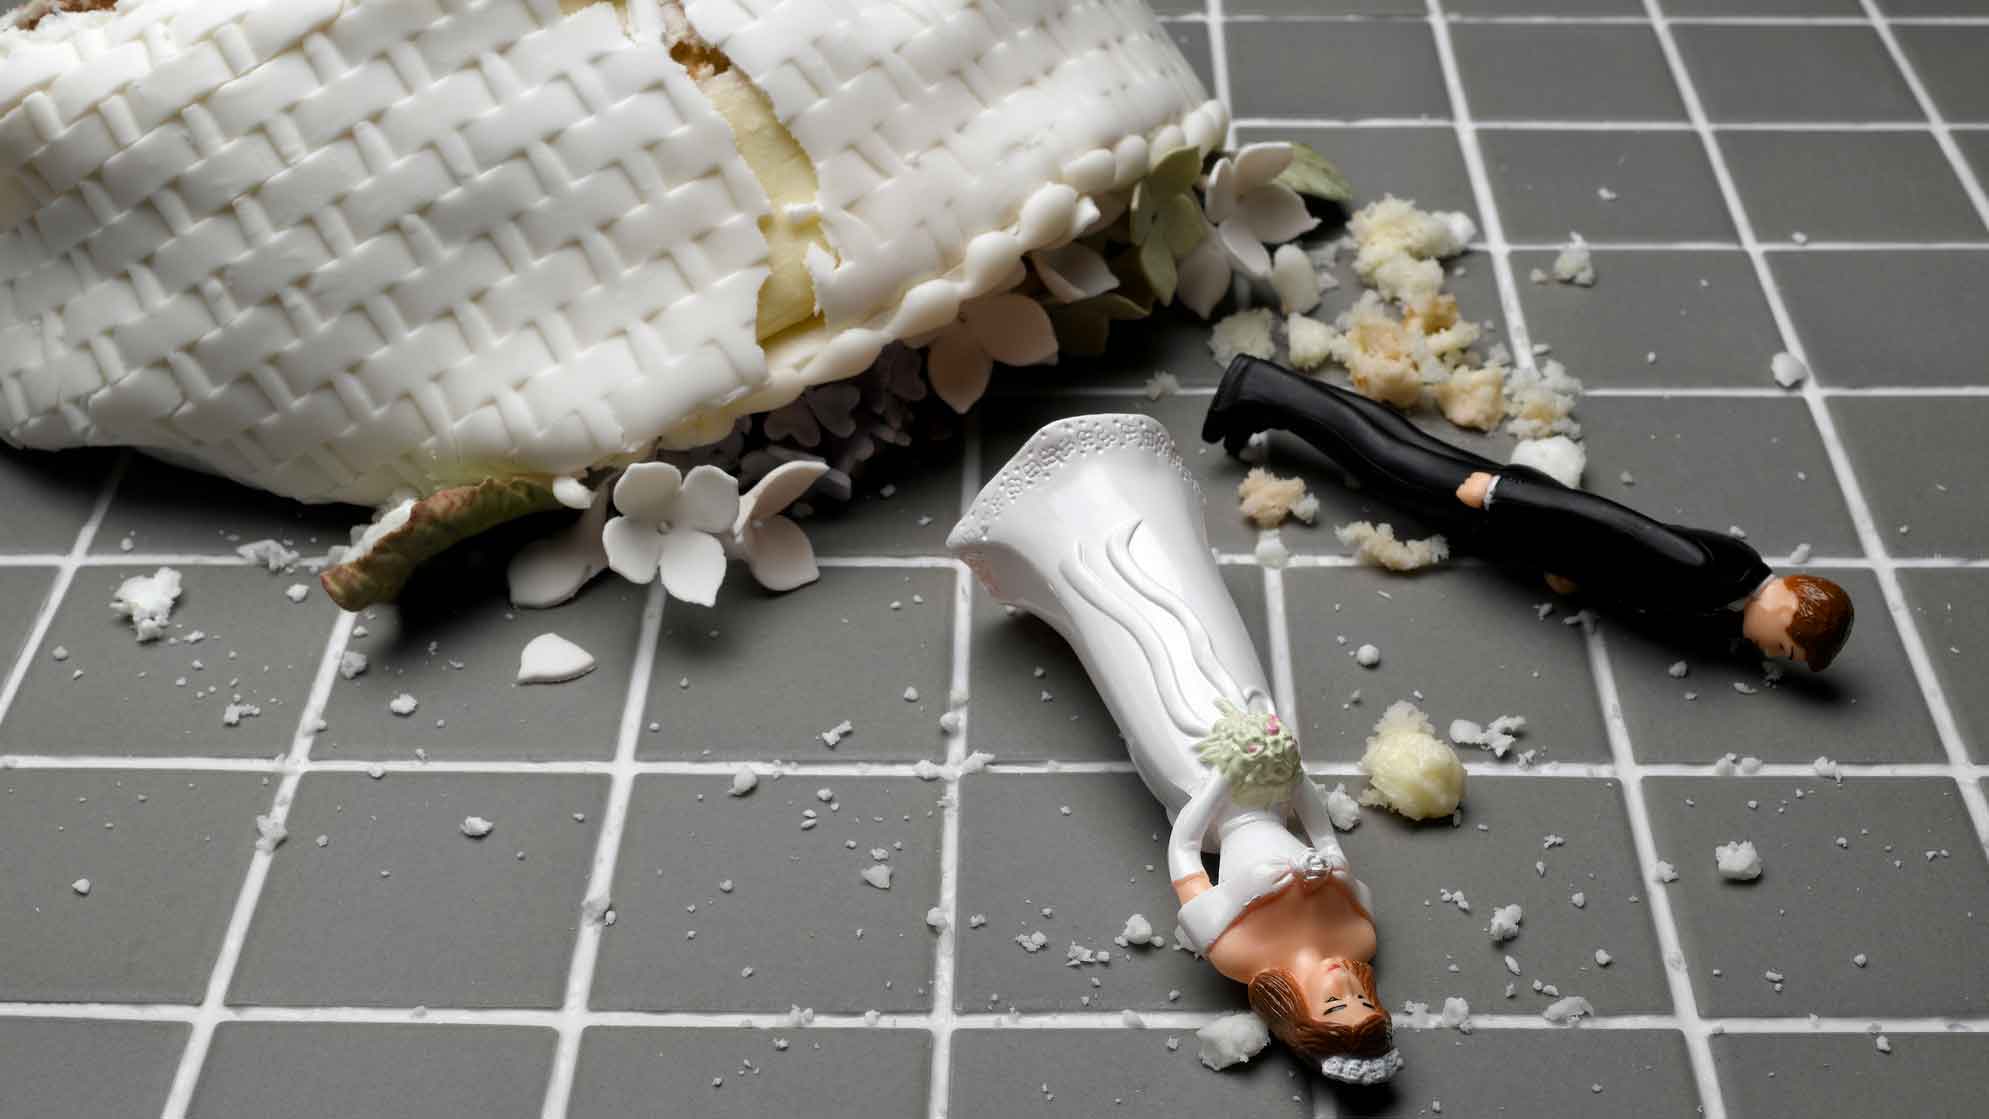 Bride’s death at wedding led to a bizarre ceremony